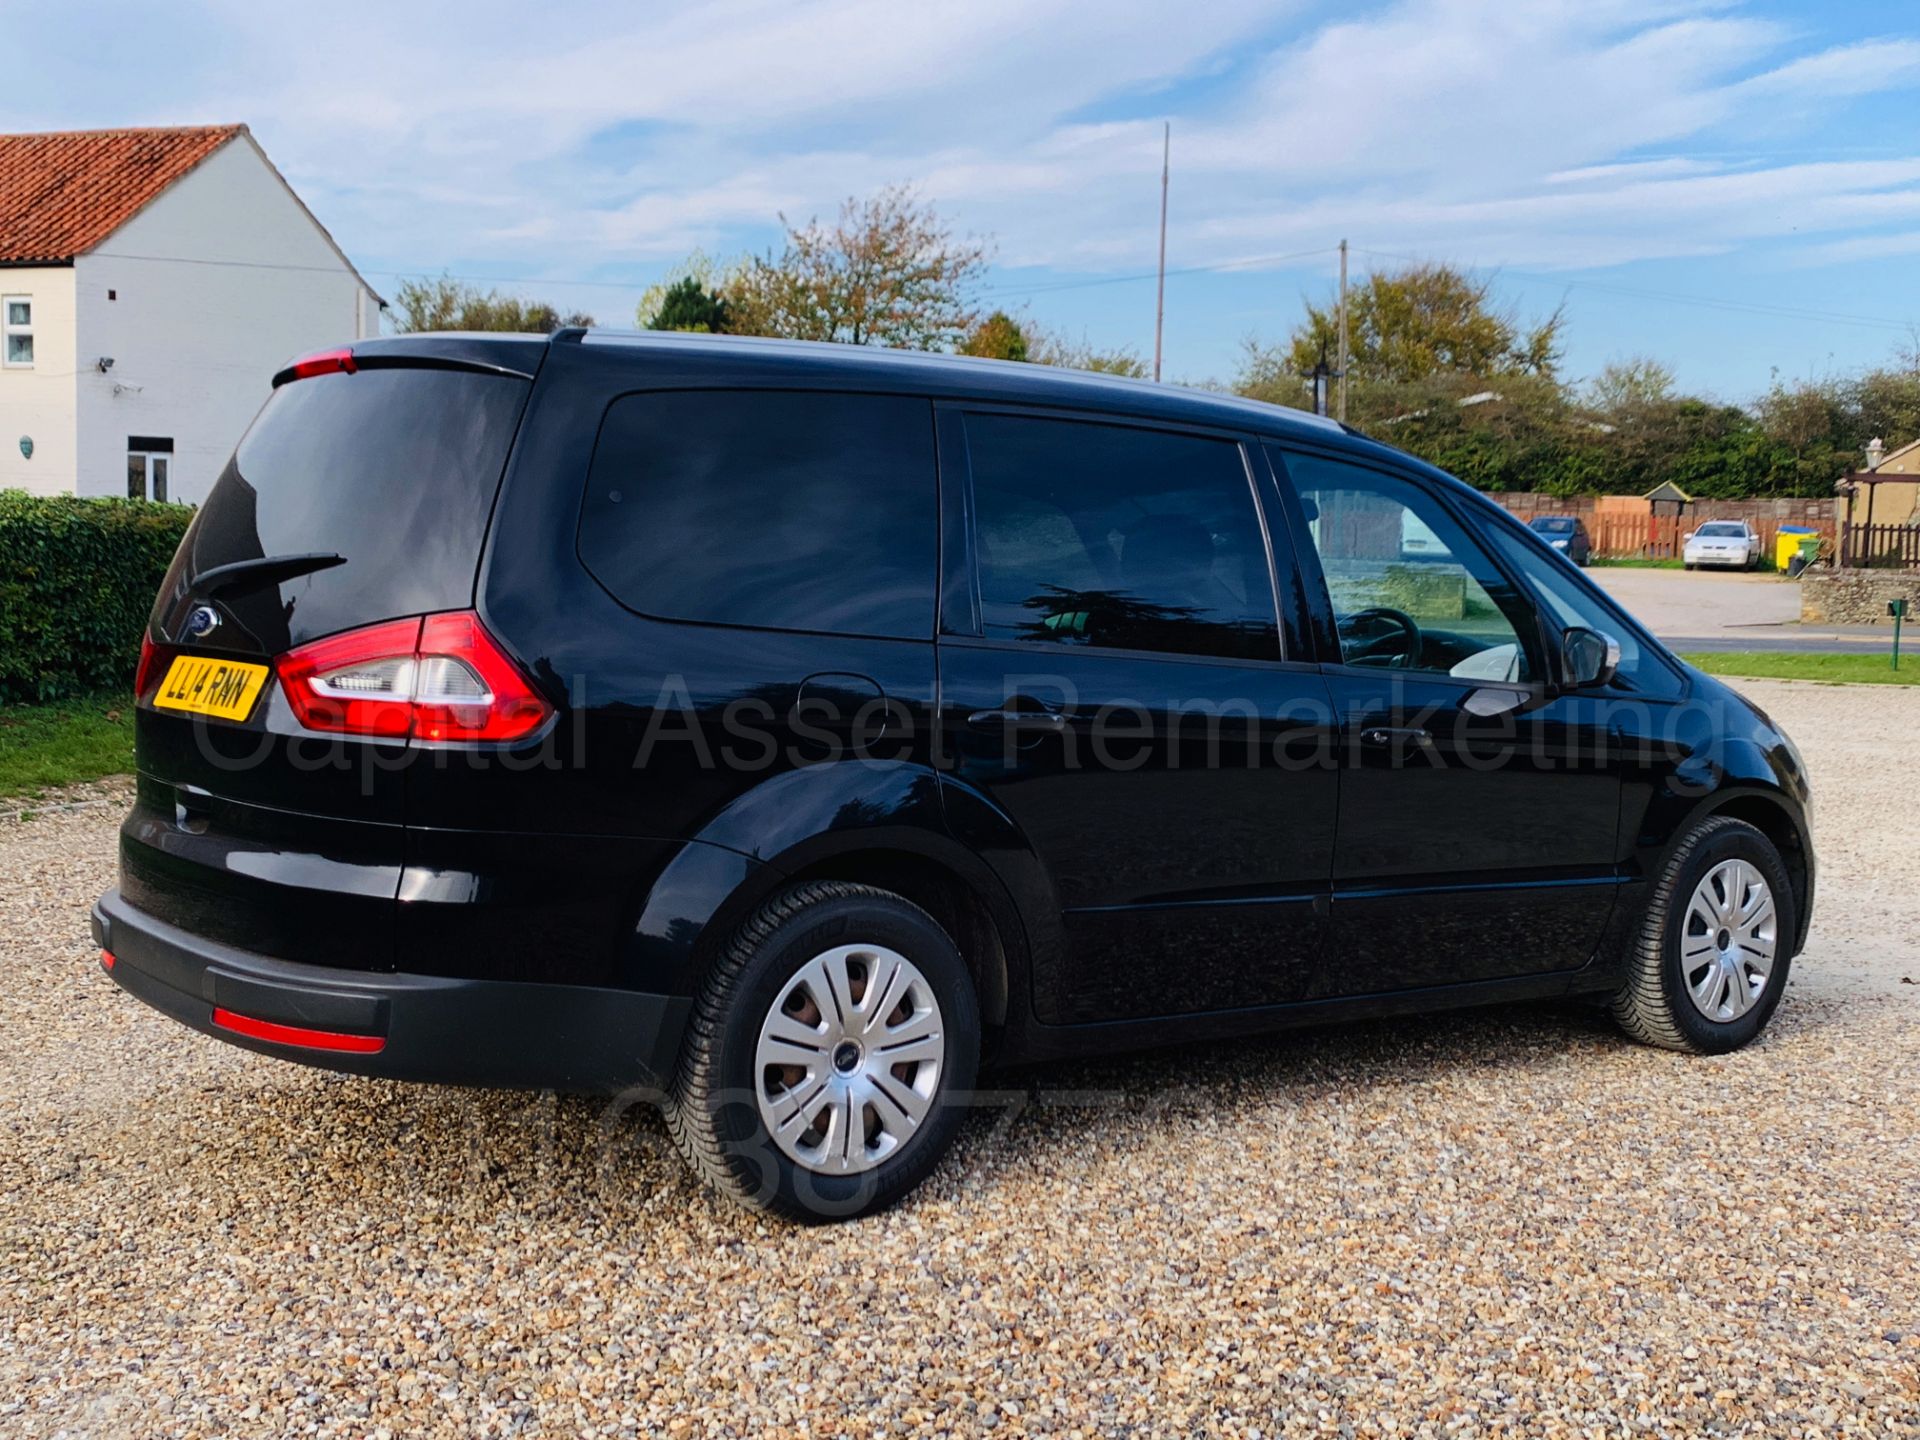 (ON SALE) FORD GALAXY **ZETEC** 7 SEATER MPV (2014) 2.0 TDCI - 140 BHP - AUTO POWER SHIFT (1 OWNER) - Image 11 of 36